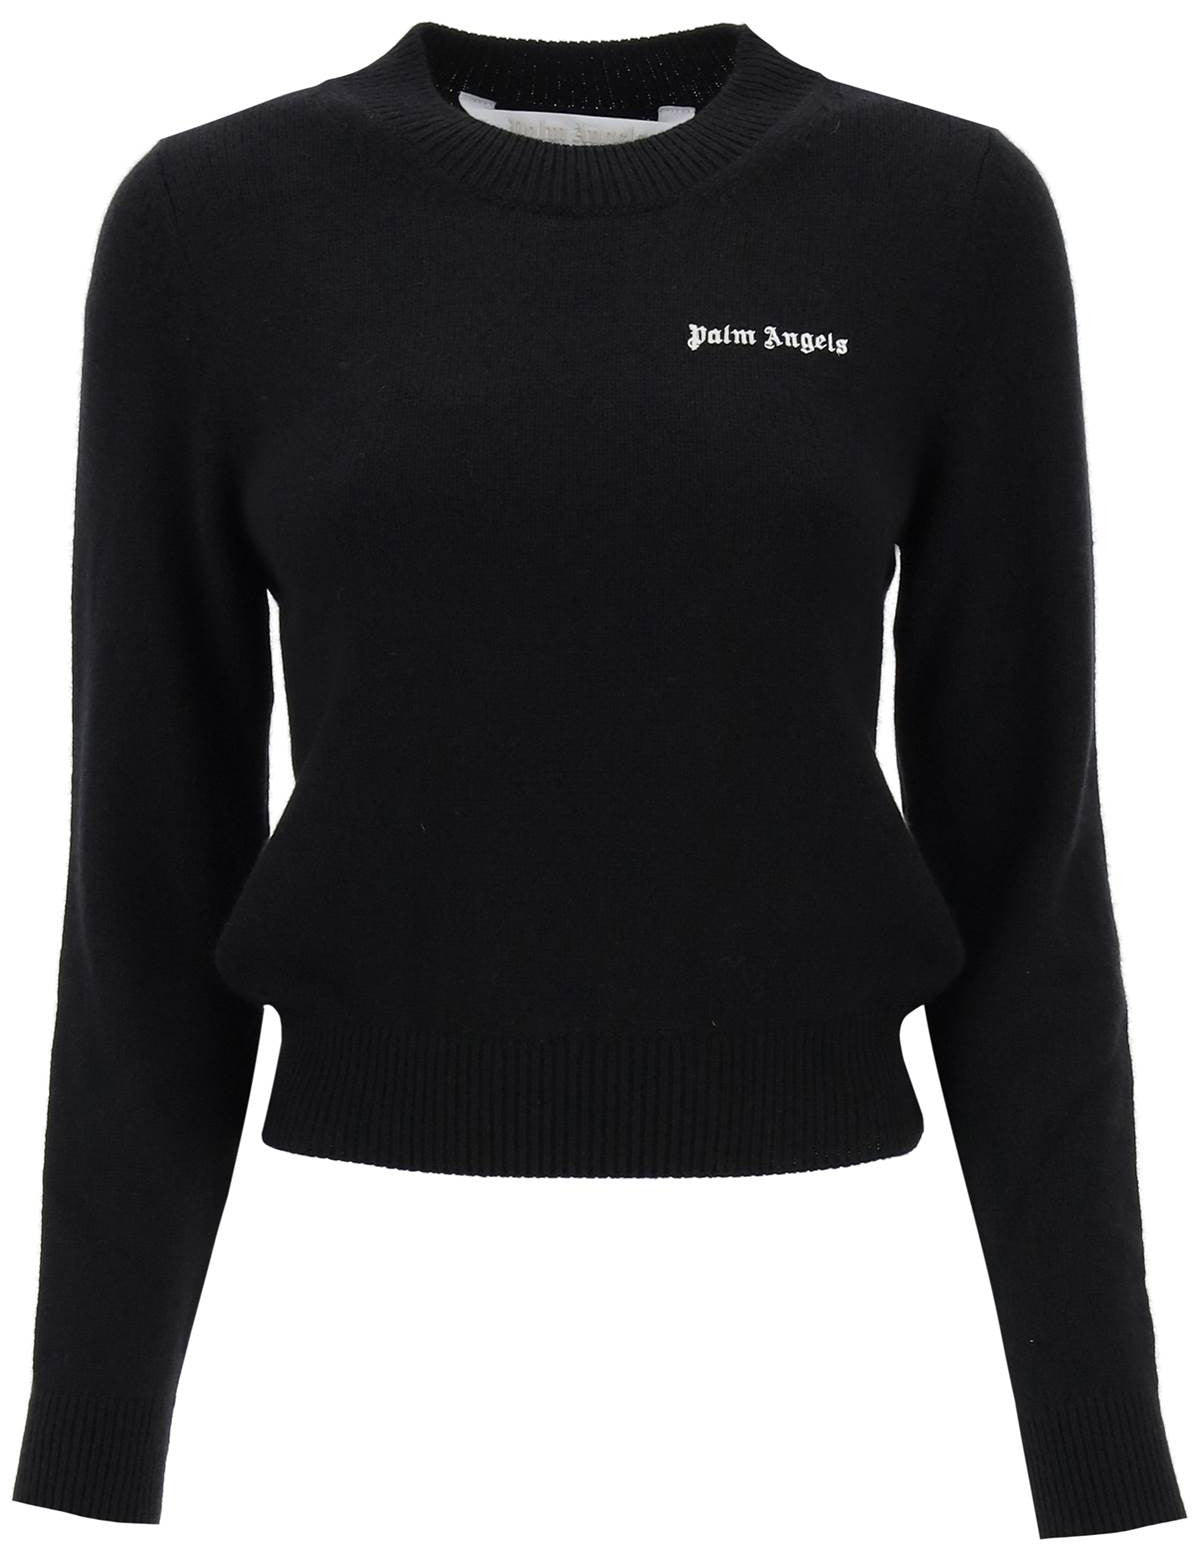 palm-angels-cropped-sweater-with-logo-embroidery.jpg